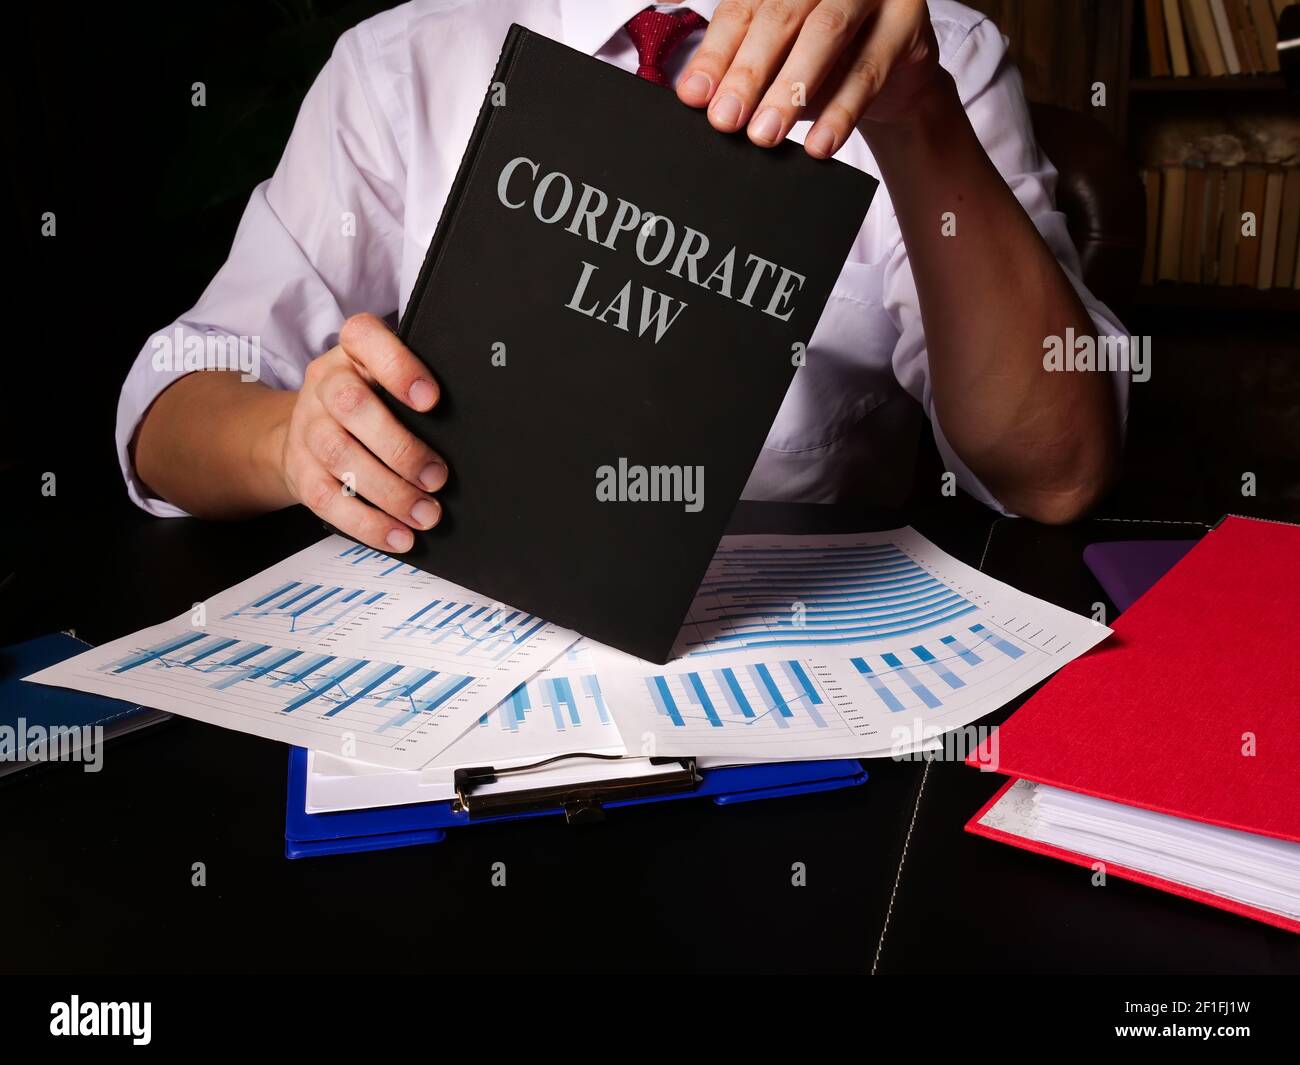 Man propose corporate law book in the office. Stock Photo